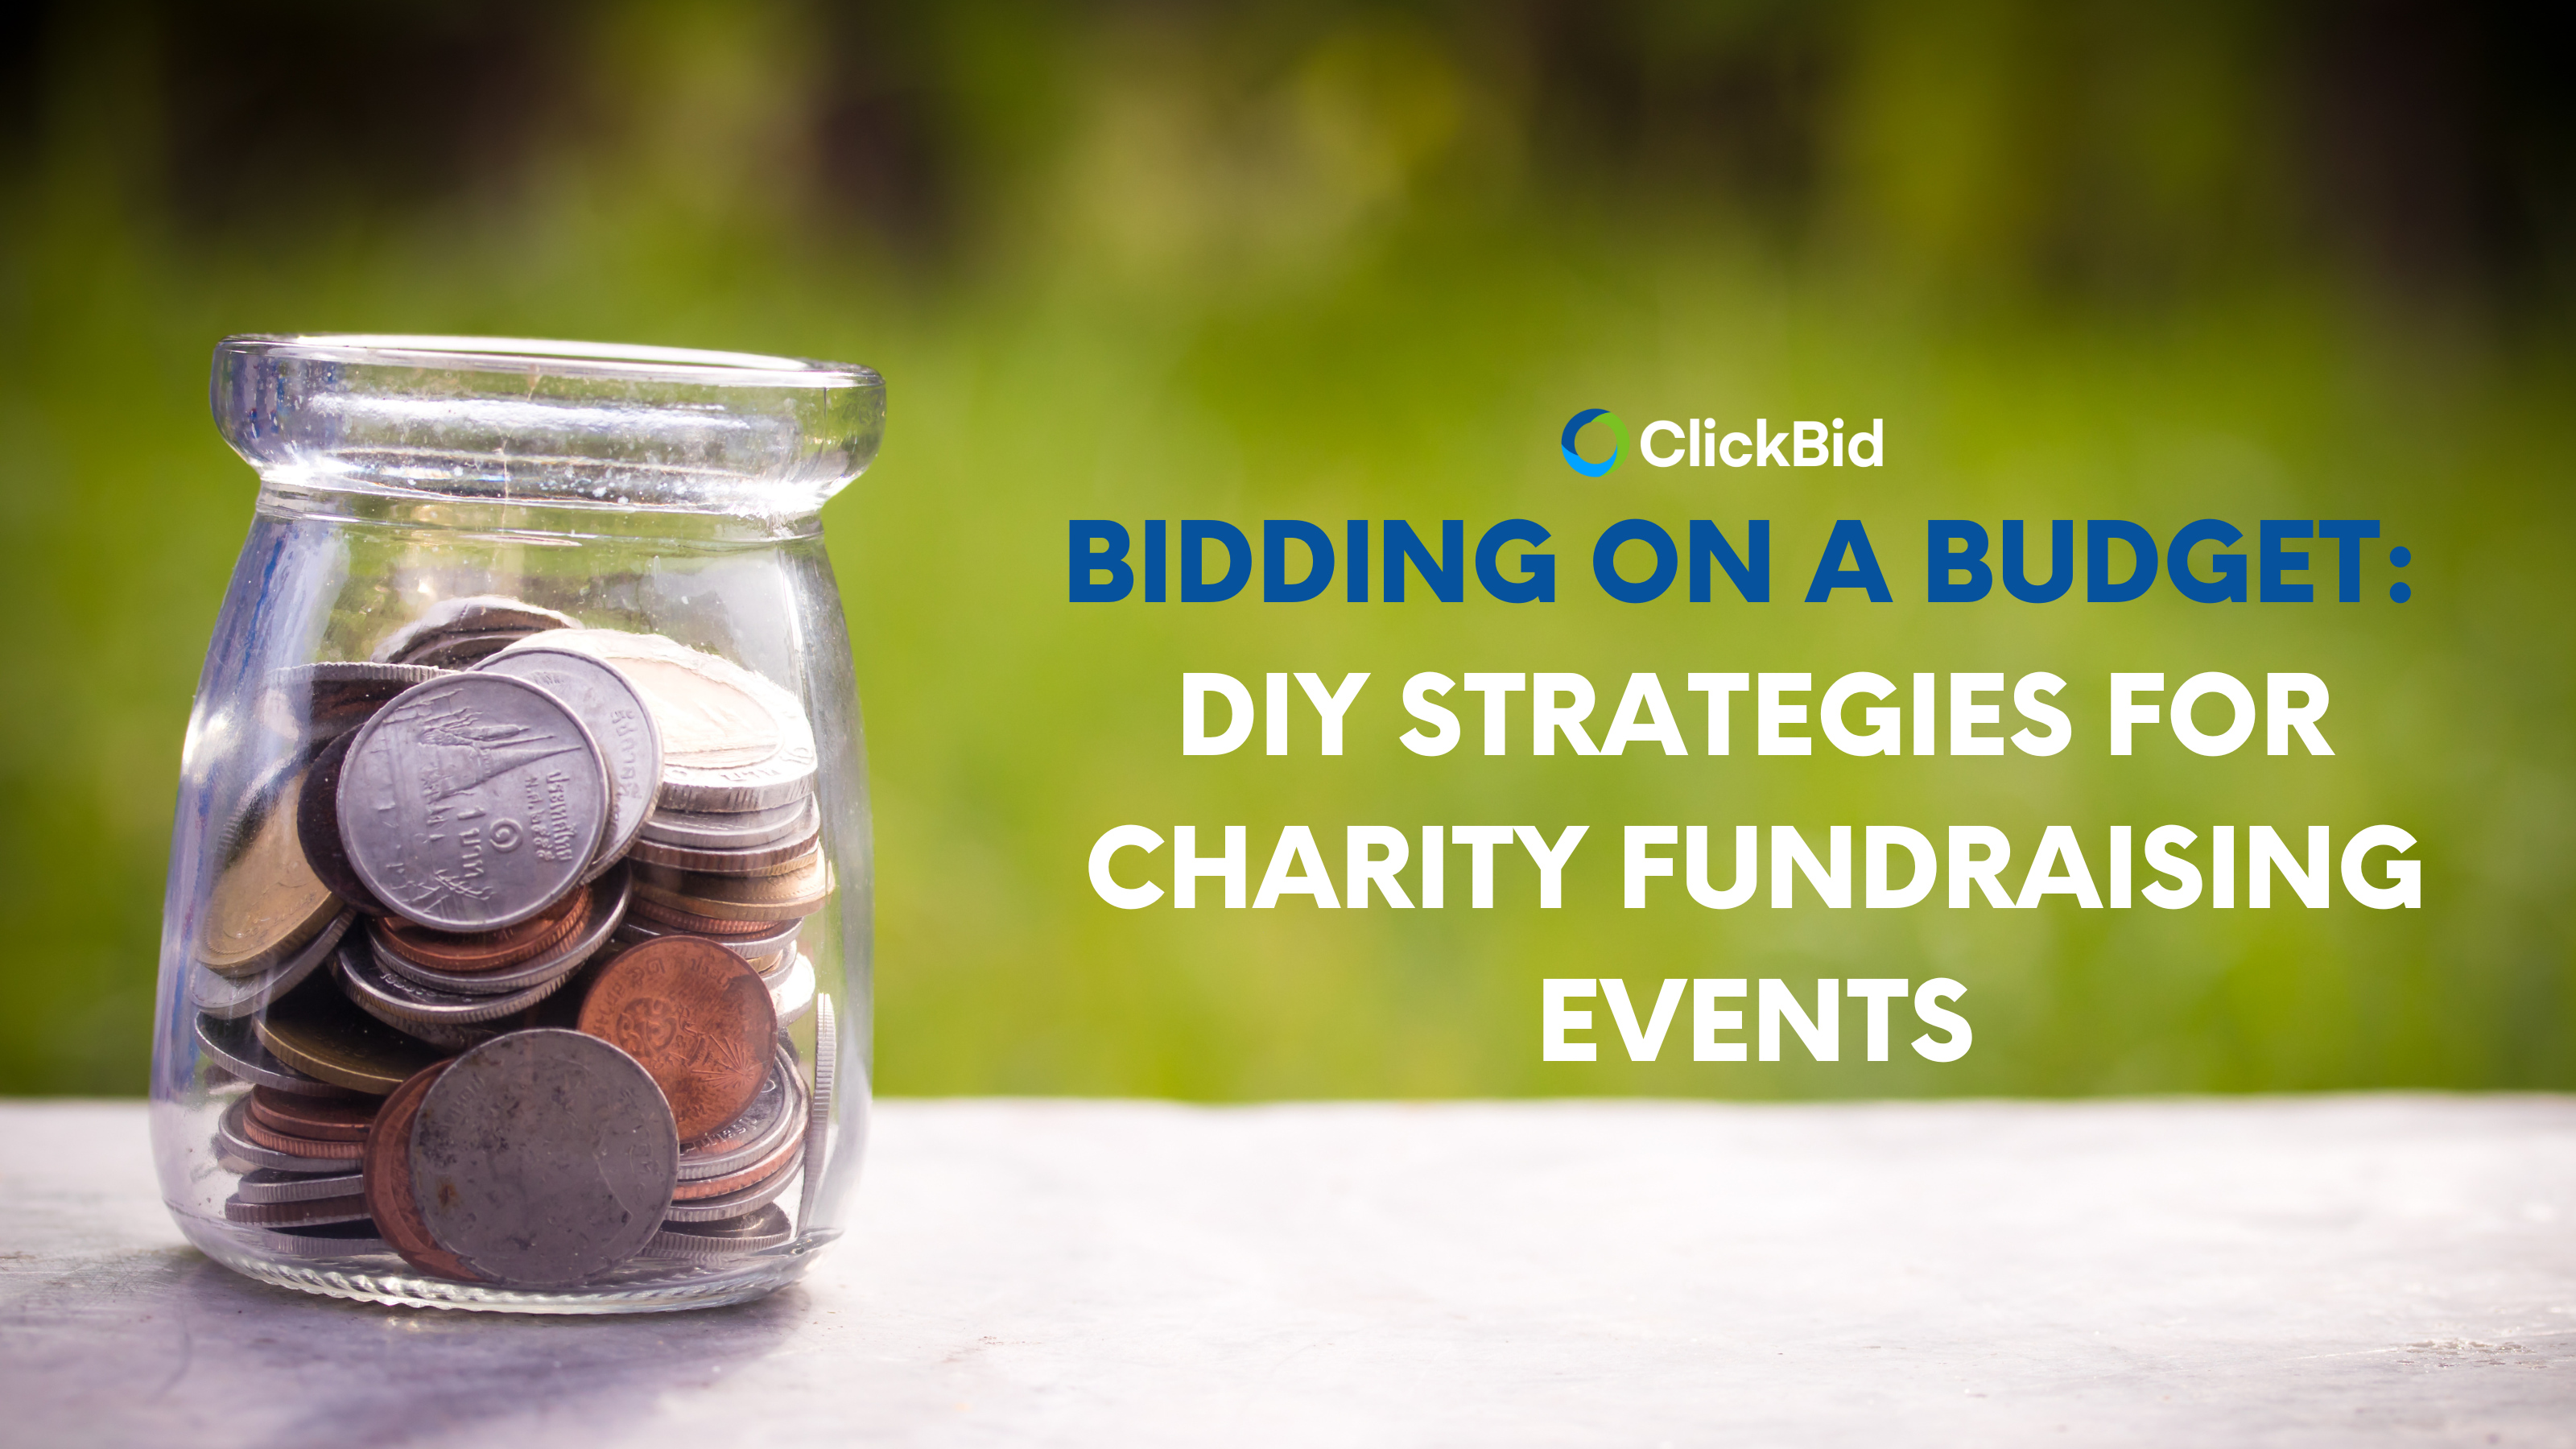 Bidding on a Budget: How to Run a Fundraising Event Without a Mobile Bidding Platform